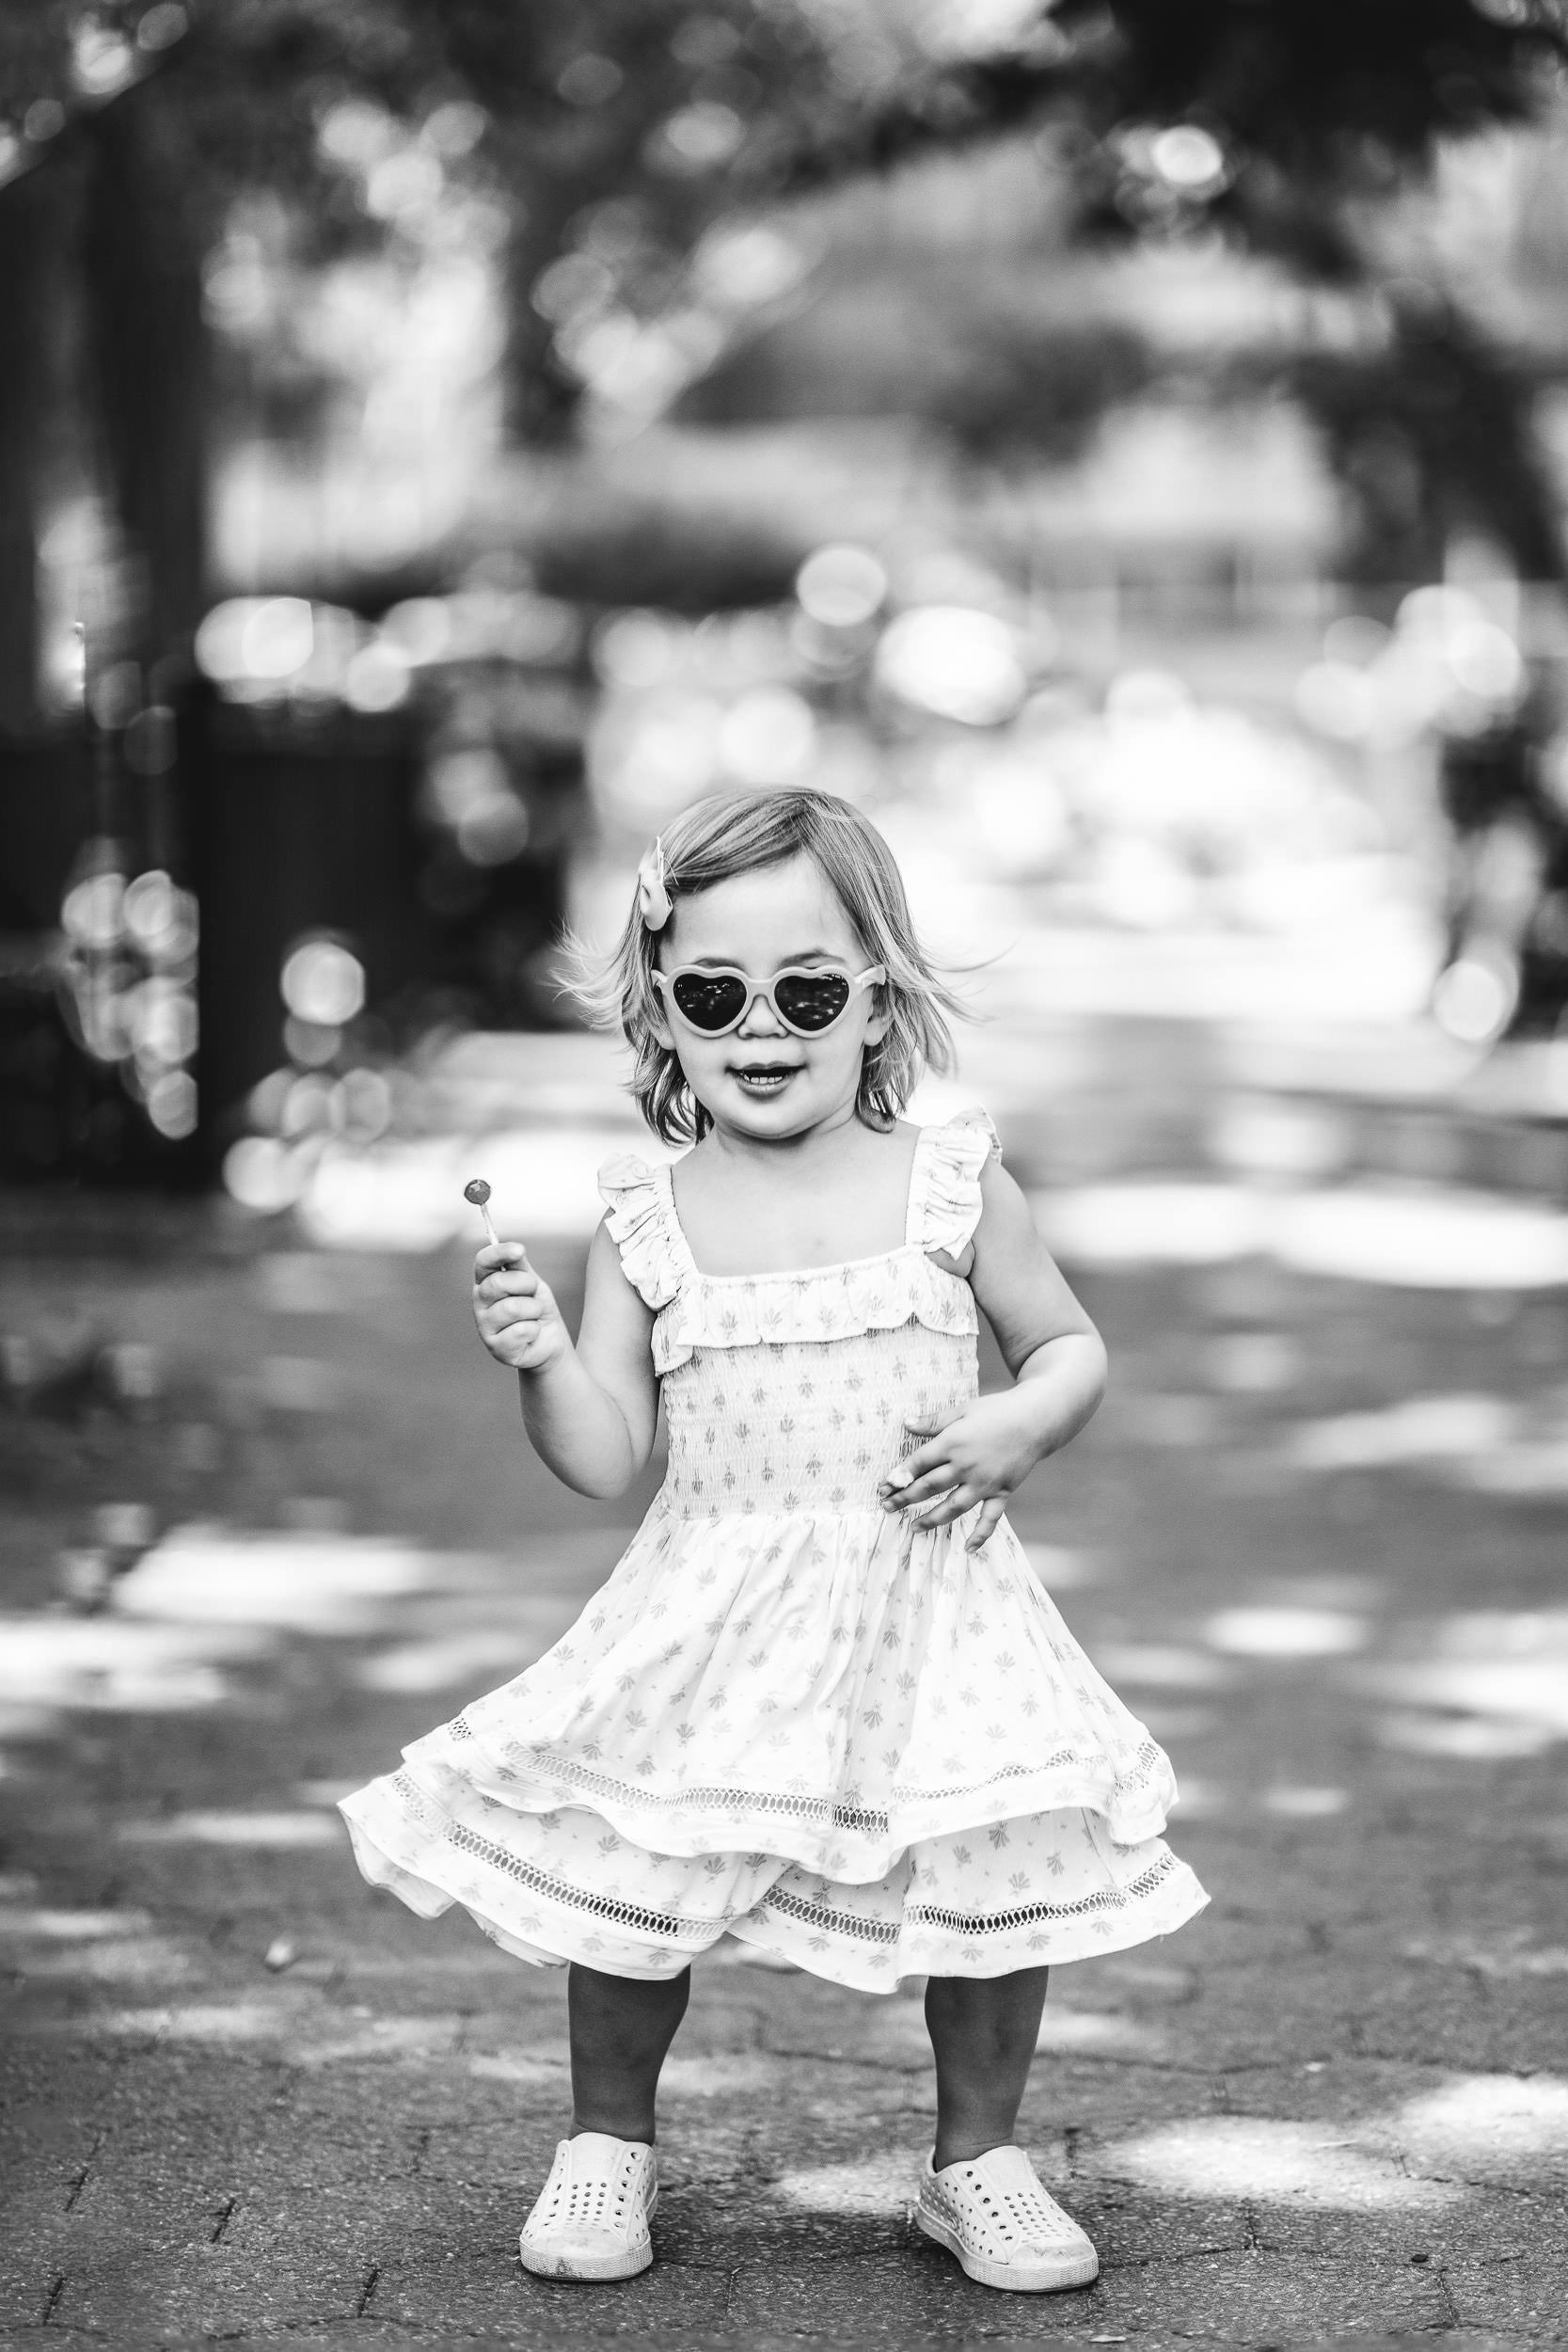  Modern park child portrait with a little girl dancing in the summertime by Nicole Hawkins Photography. modern child photos #NicoleHawkinsPhotograaphy #NicoleHawkinsChildren #NewYorkPortraits #KidsinNewYork #ChildrensPortraits #lifestyleportraits 